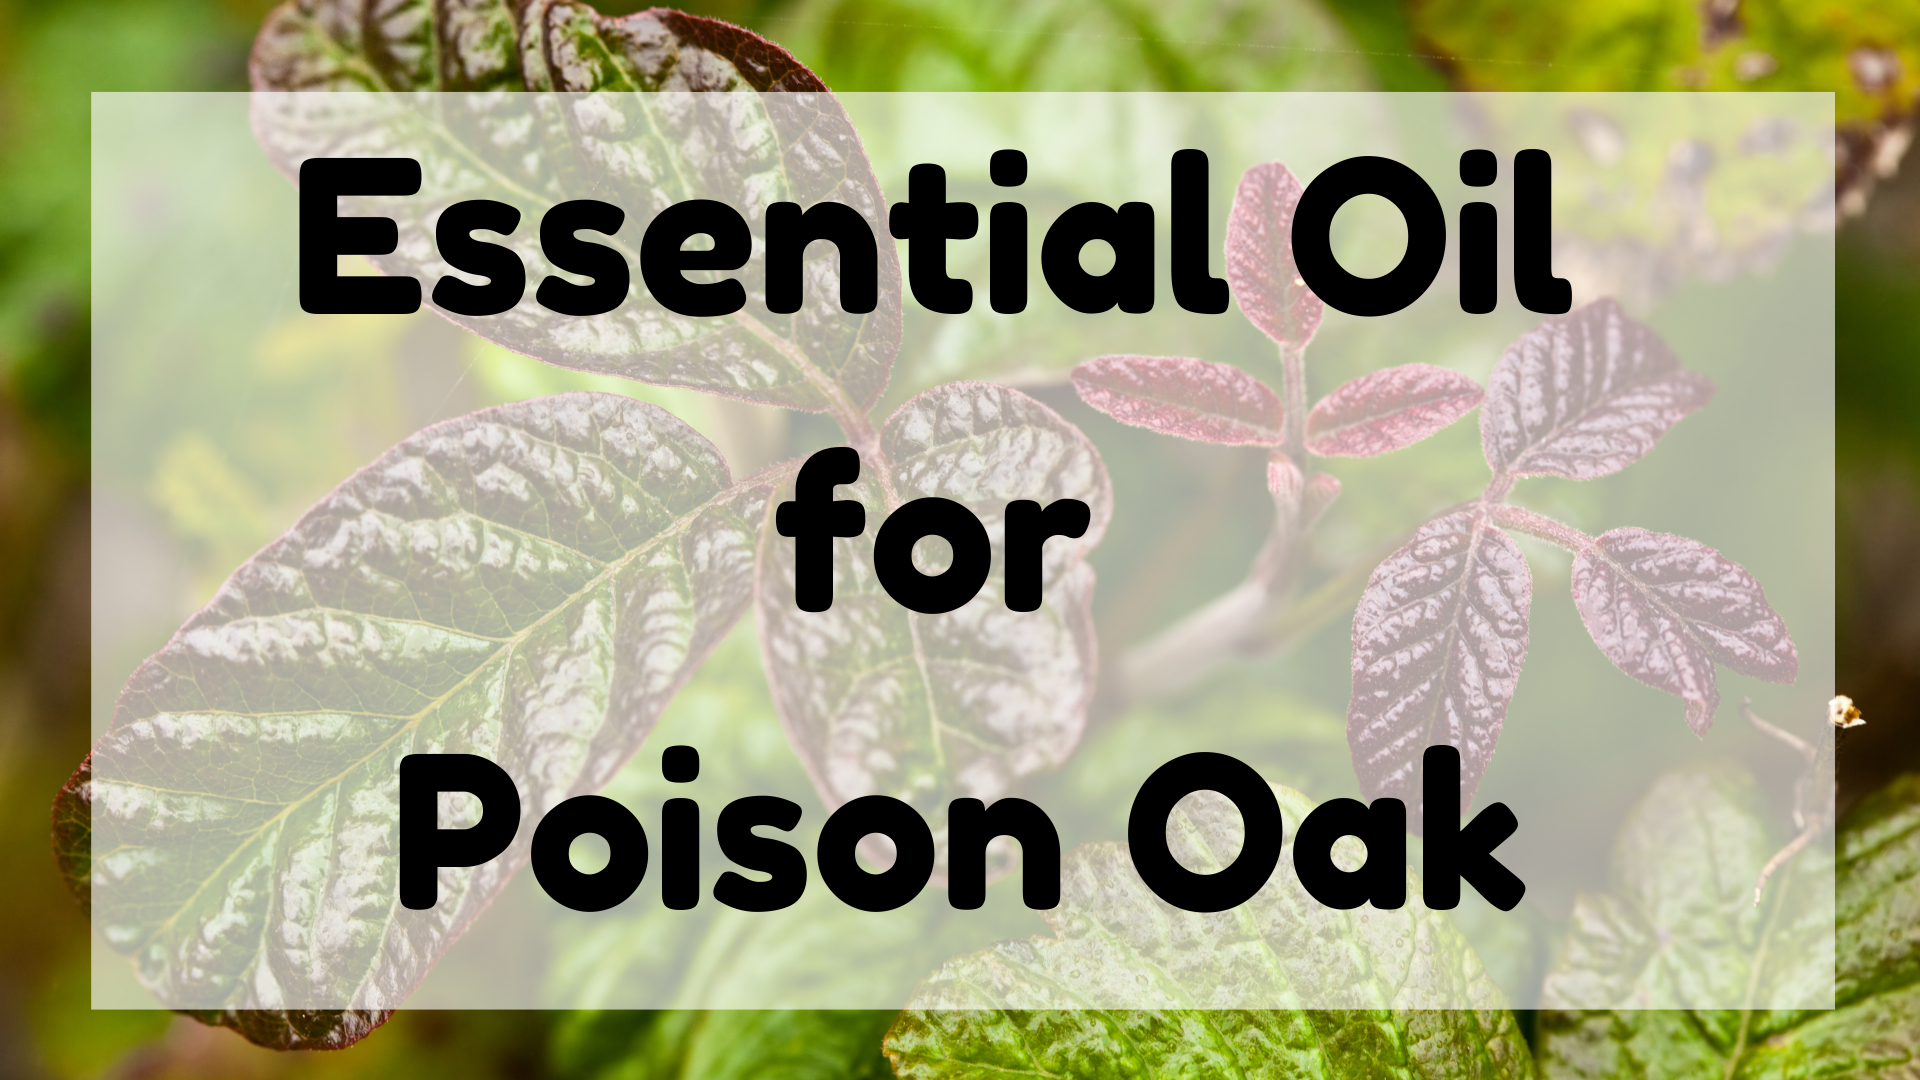 Essential Oil for Poison Oak featured image